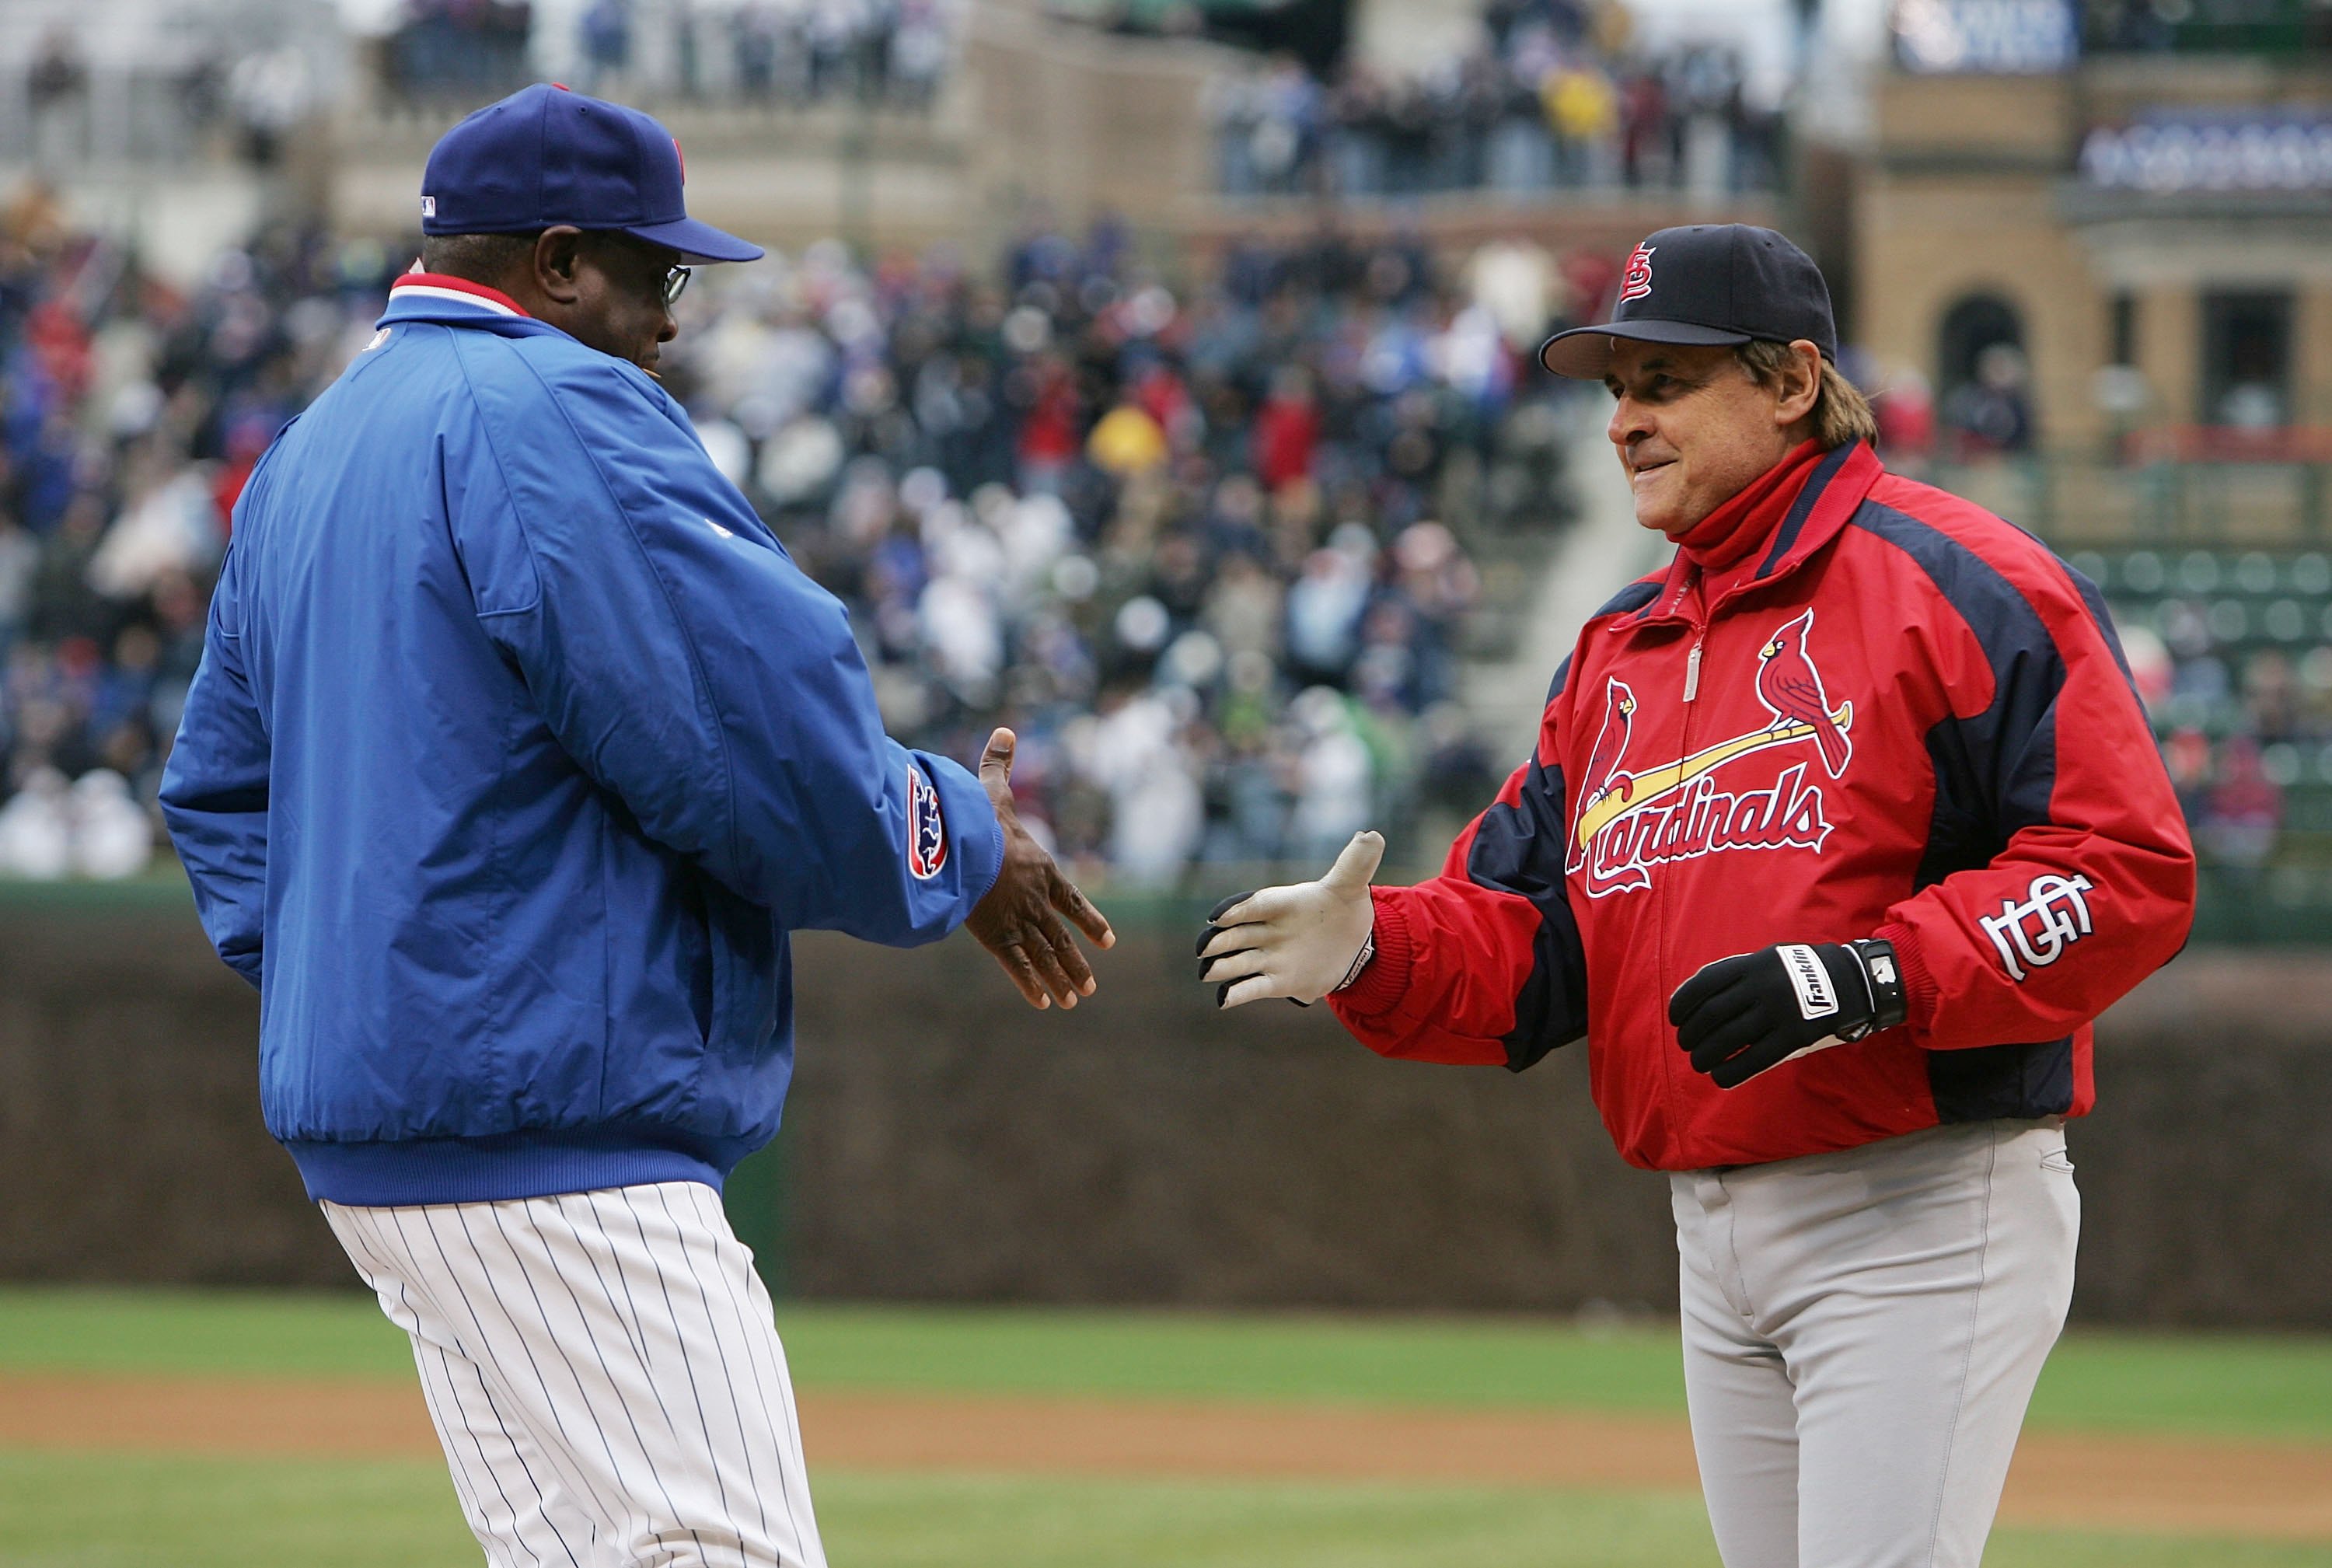 CHICAGO - APRIL 07:  Maqnager Dusty Baker of the Chicago Cubs shakes hands with Manager Tony LaRussa of the St. Louis Cardinals before the Opening Day game on April 7, 2006 at Wrigley Field in Chicago, Illinois. The Cubs defeated the Cardinals 5-1.  (Phot